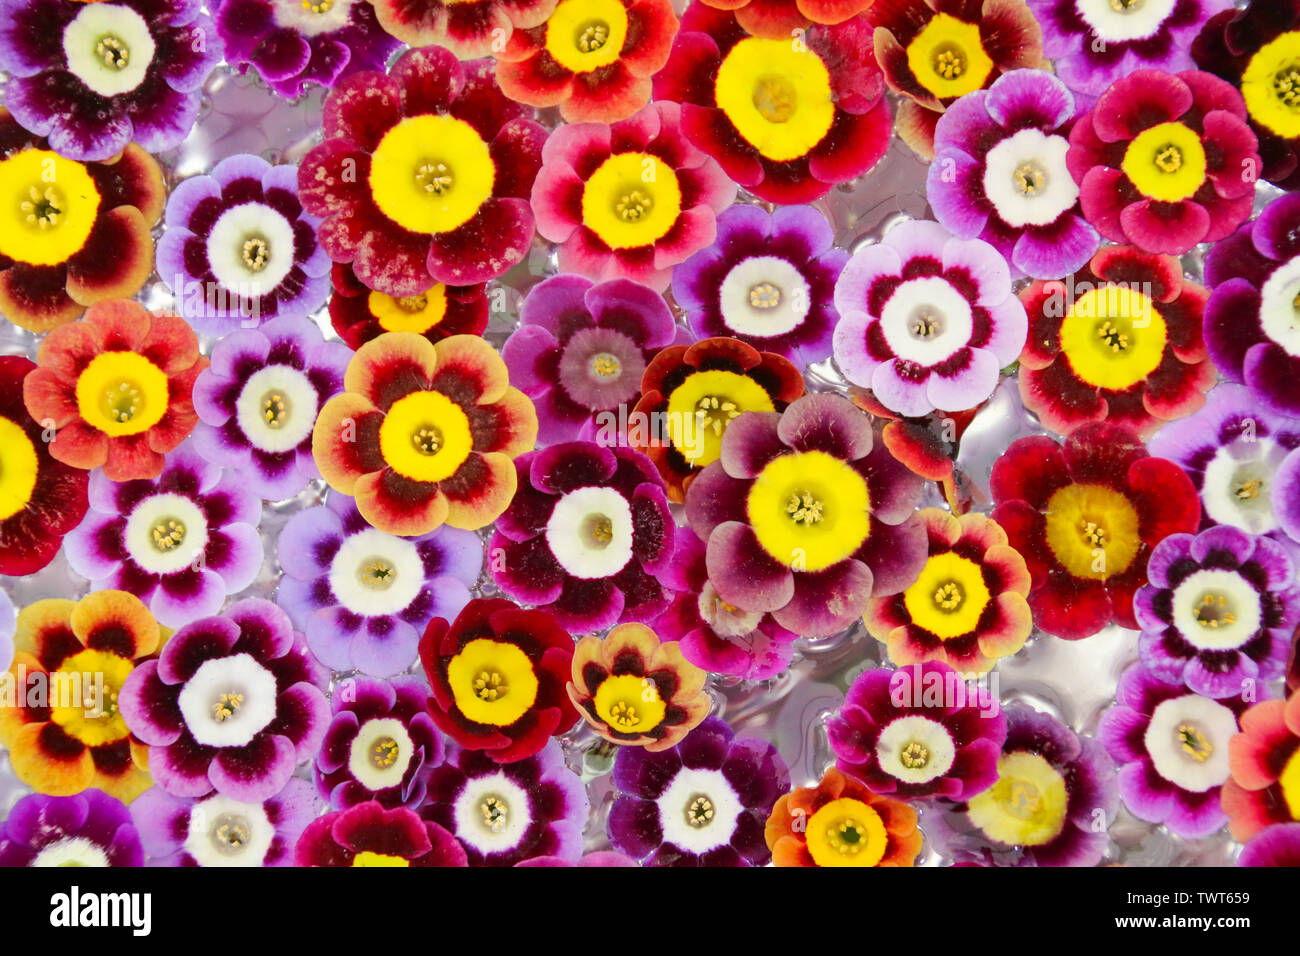 Primula auricula flowers floating in a bowl of water to make an abstract floral background Stock Photo